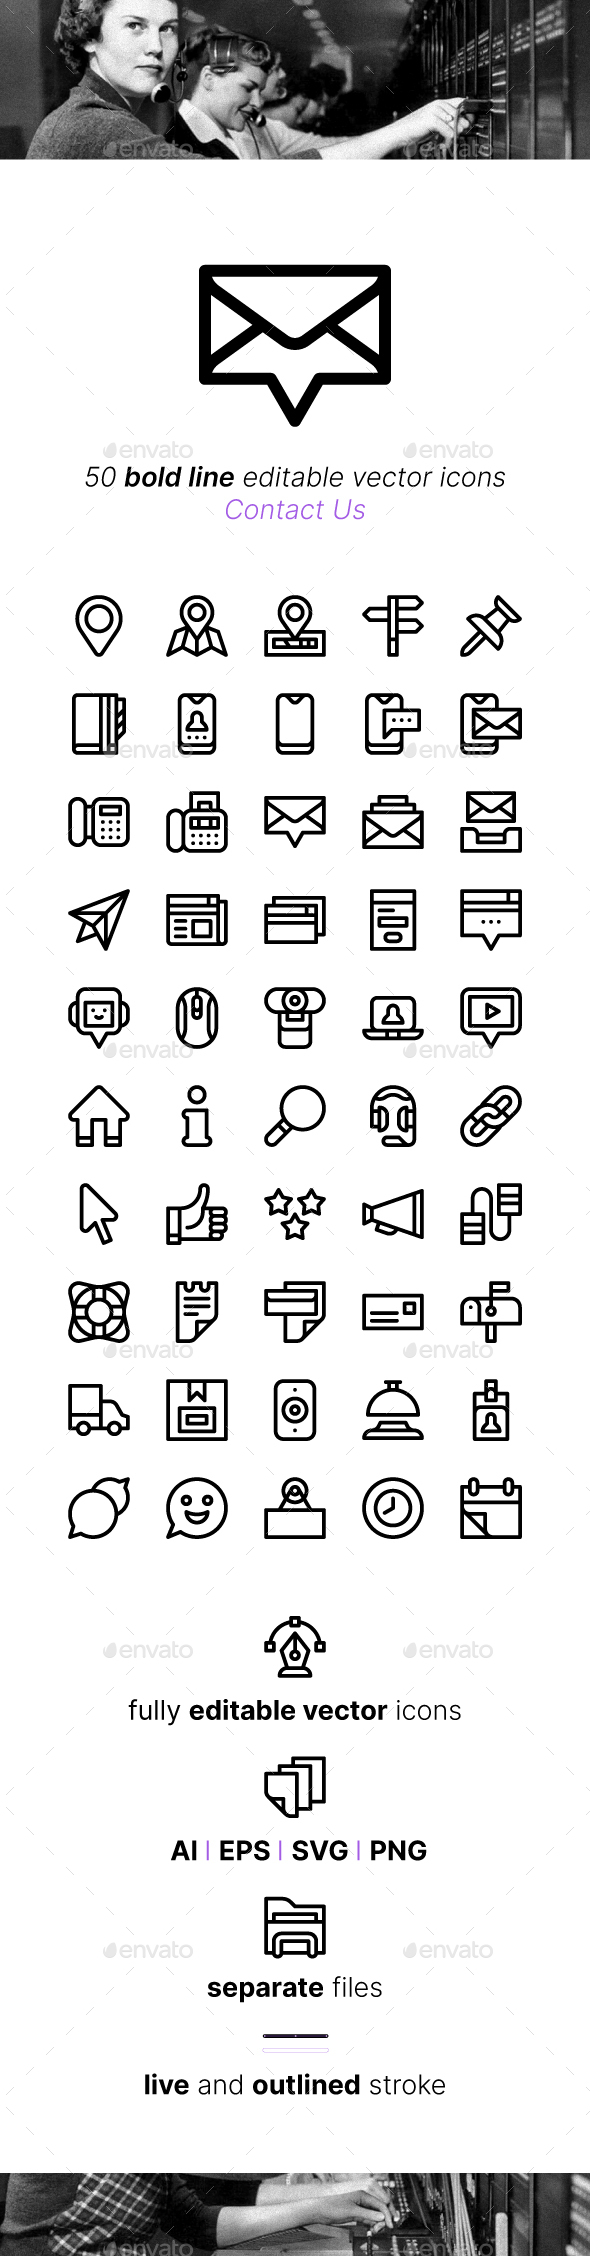 [DOWNLOAD]50 Contact Us Icons